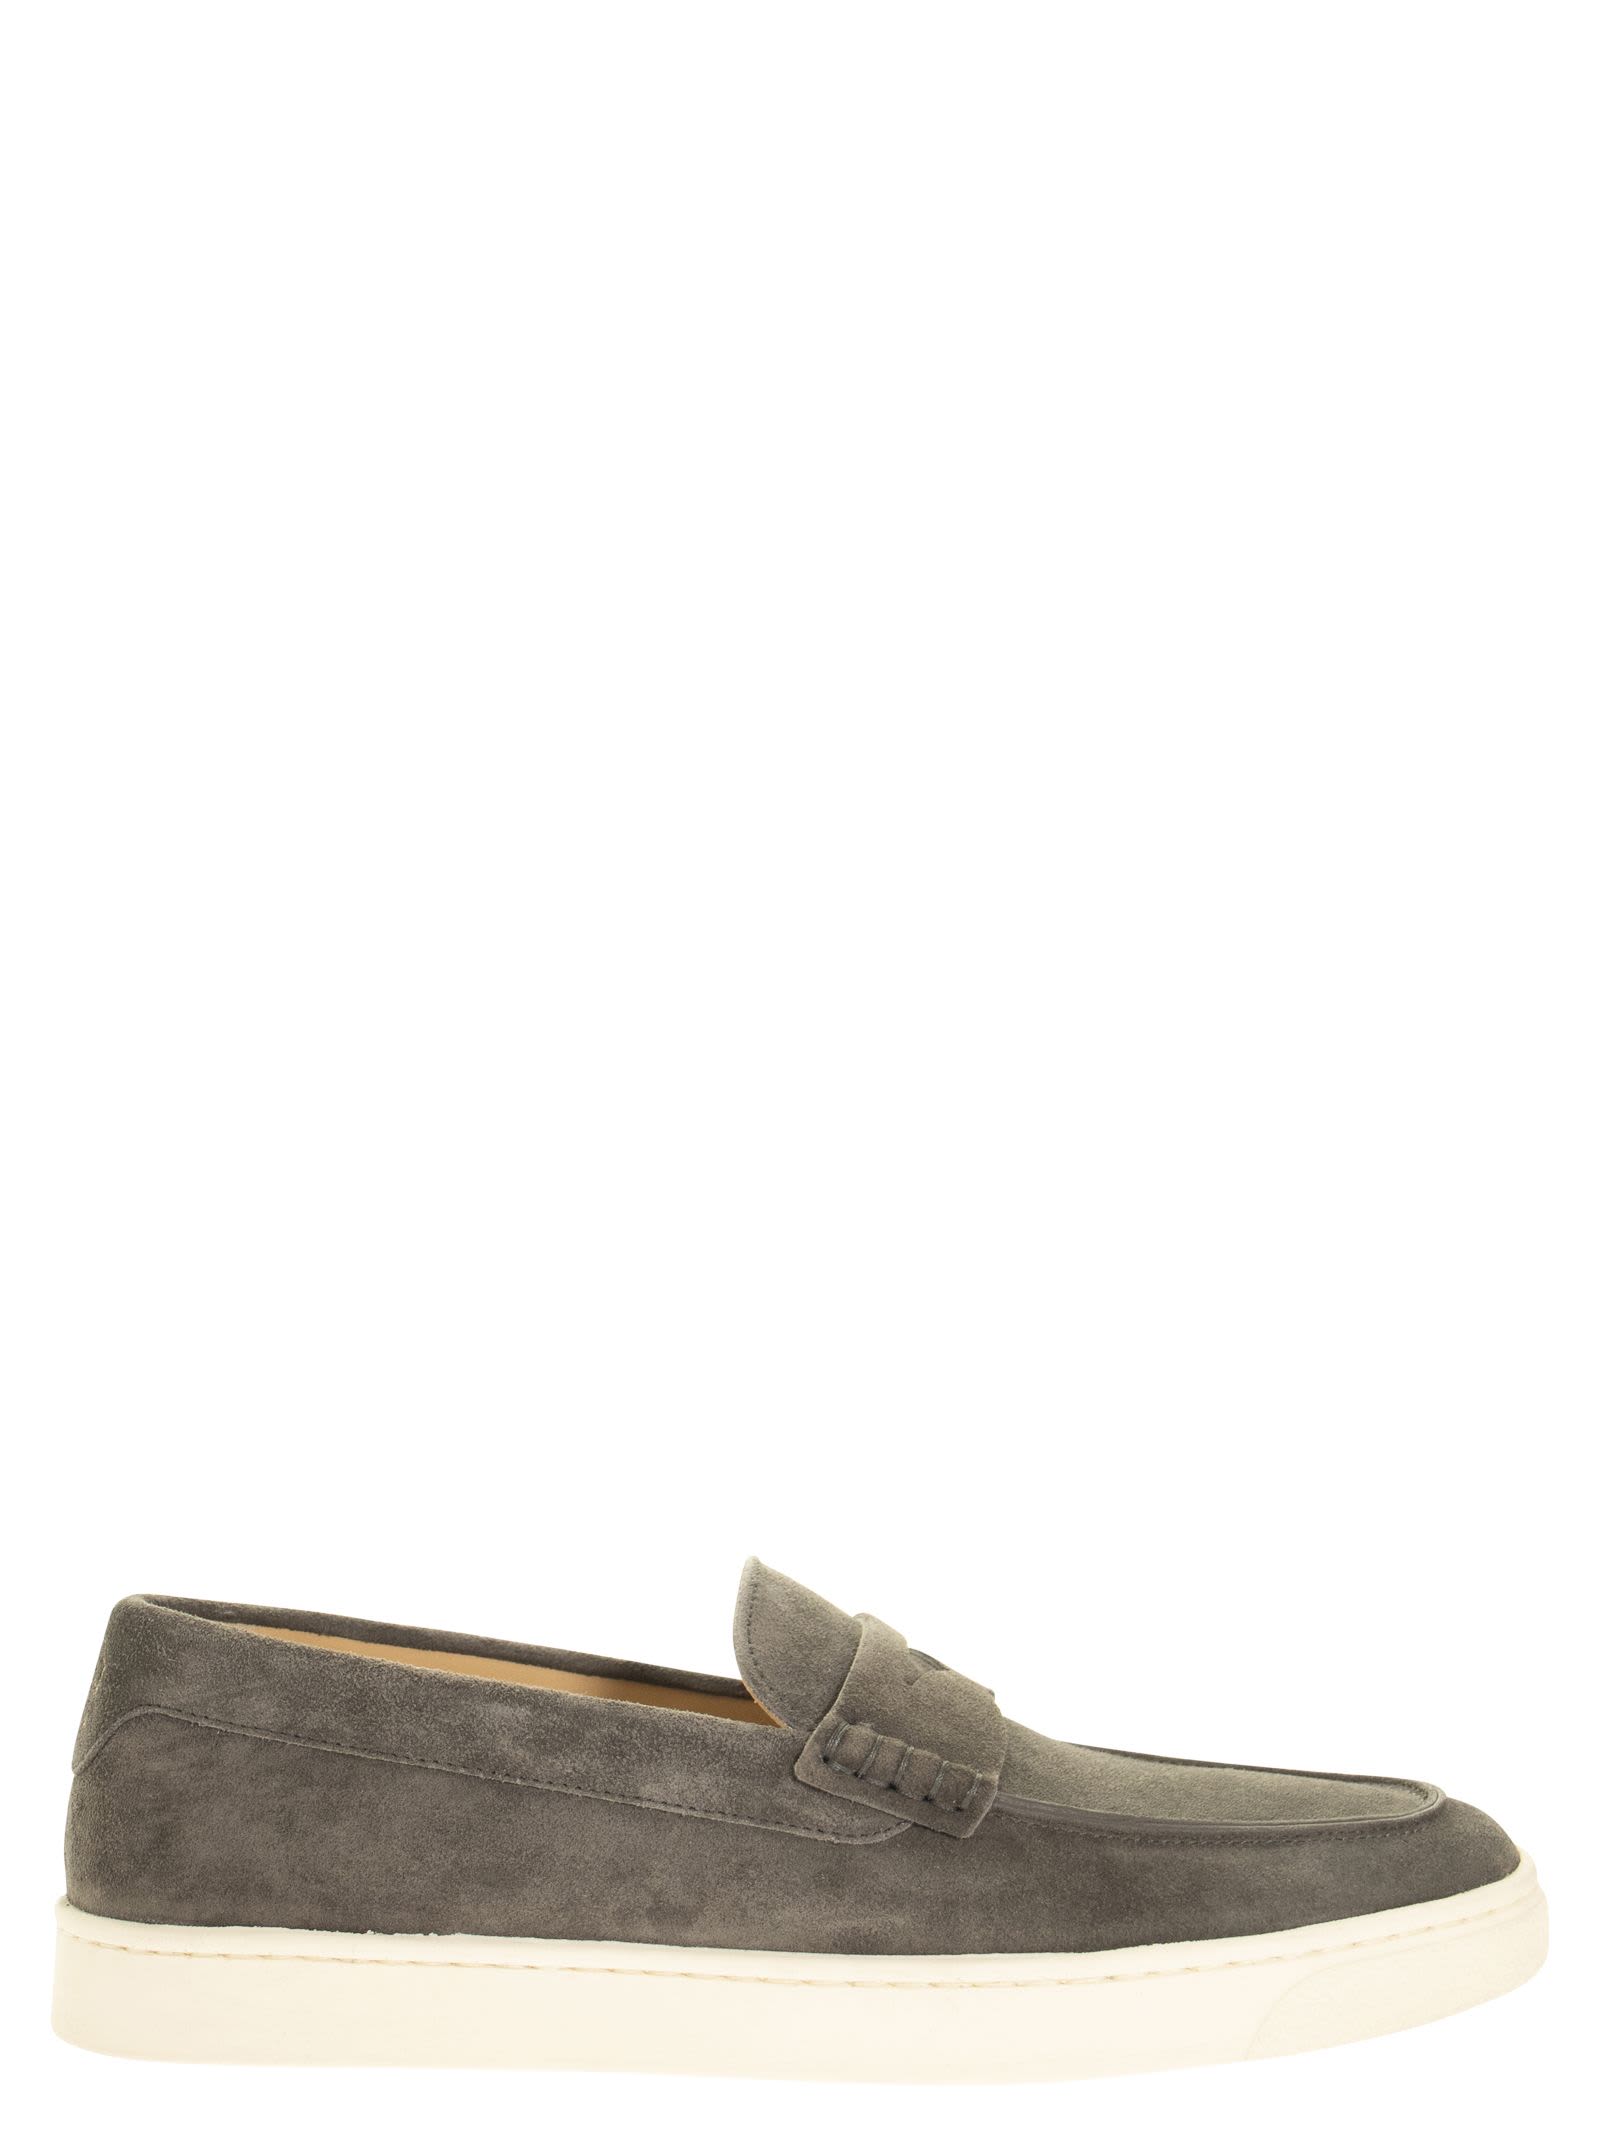 Brunello Cucinelli Suede Loafer With Latex Sole